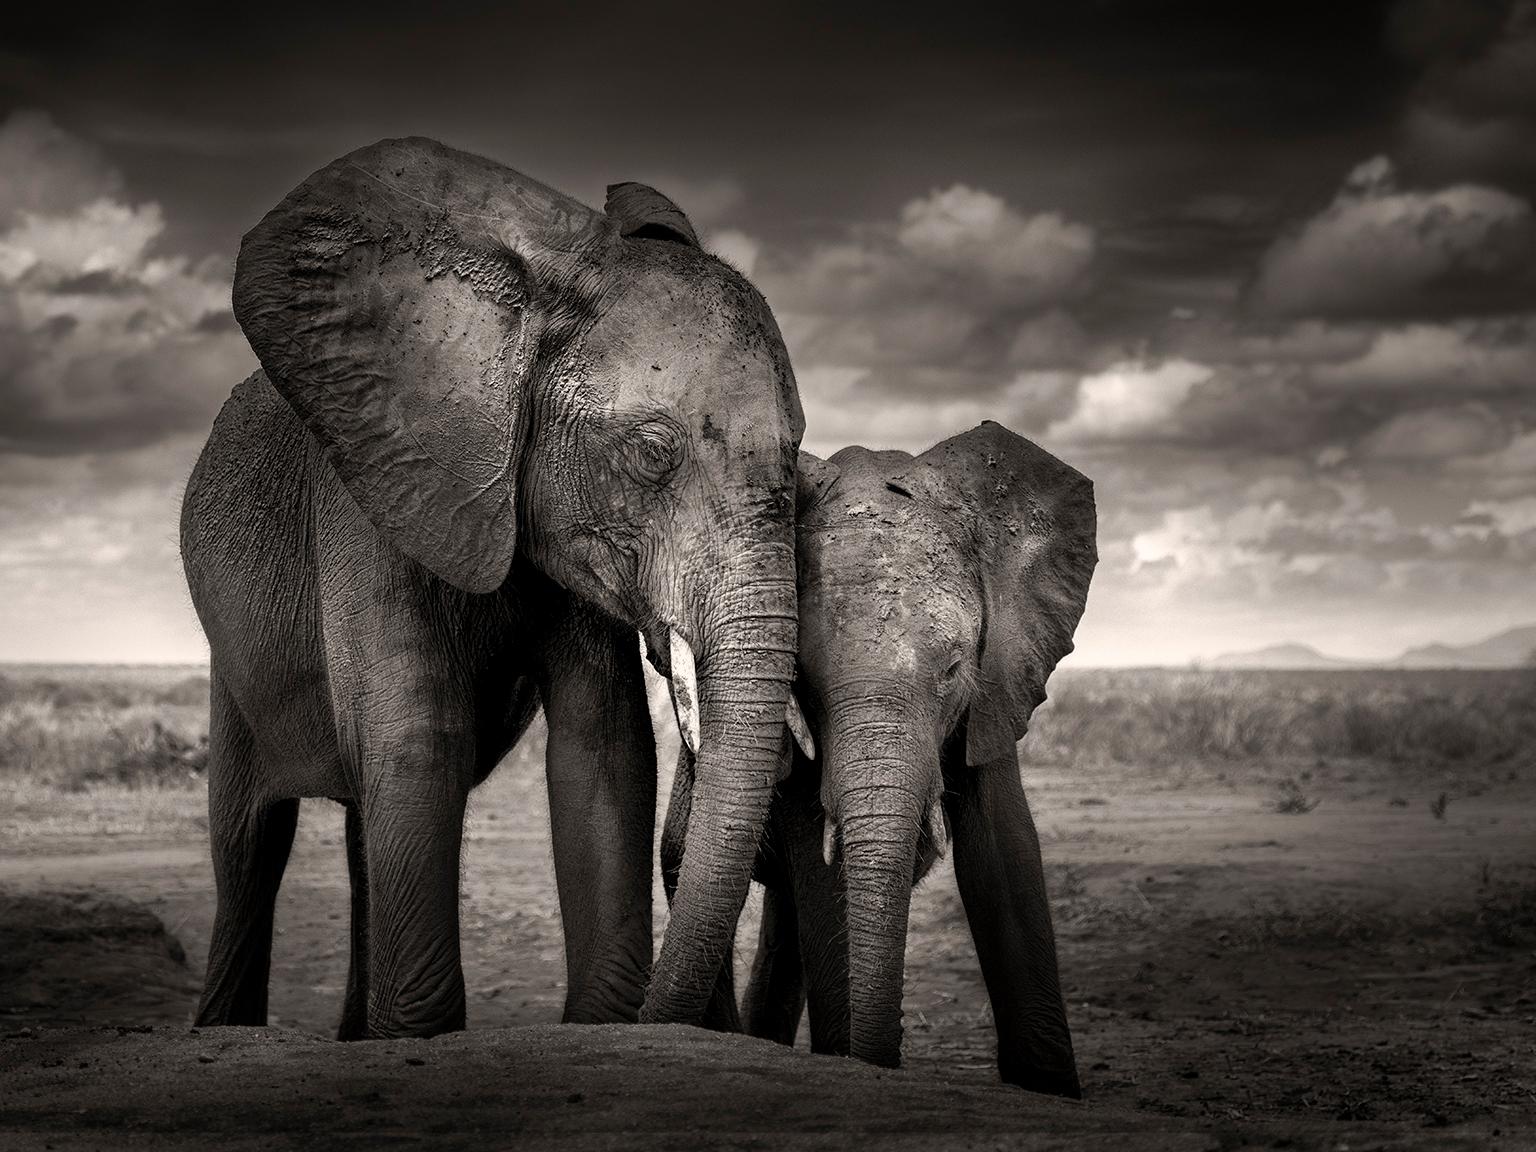 Joachim Schmeisser Black and White Photograph - Soulmates, Elephant, animal, wildlife, black and white photography, africa